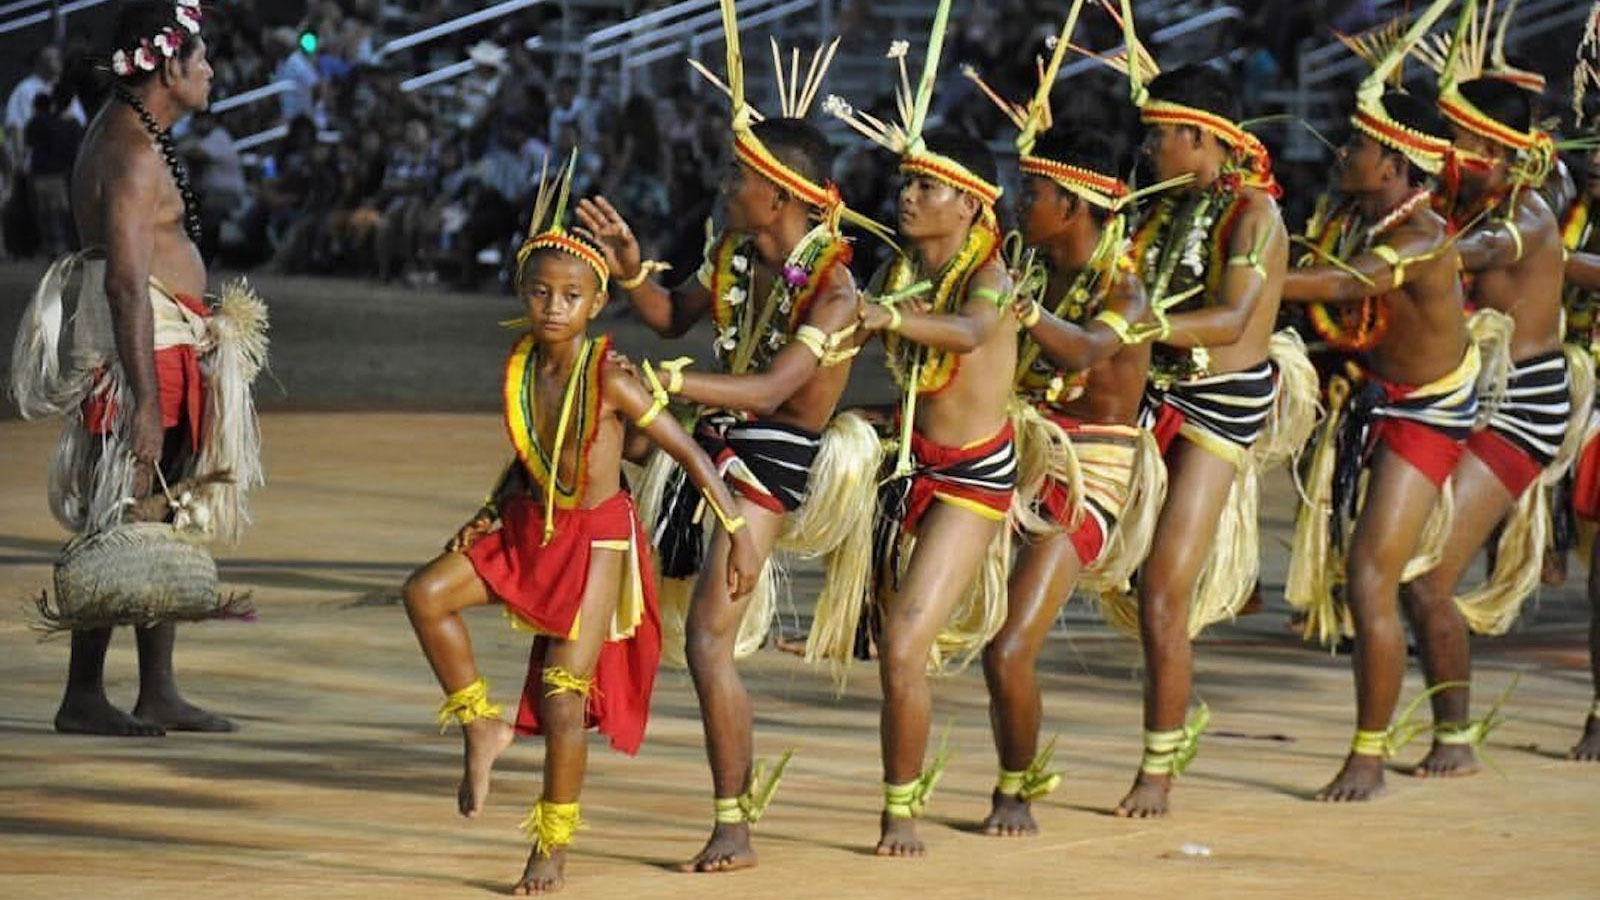 Pacific Islanders in traditional outfits performing at an arts festival